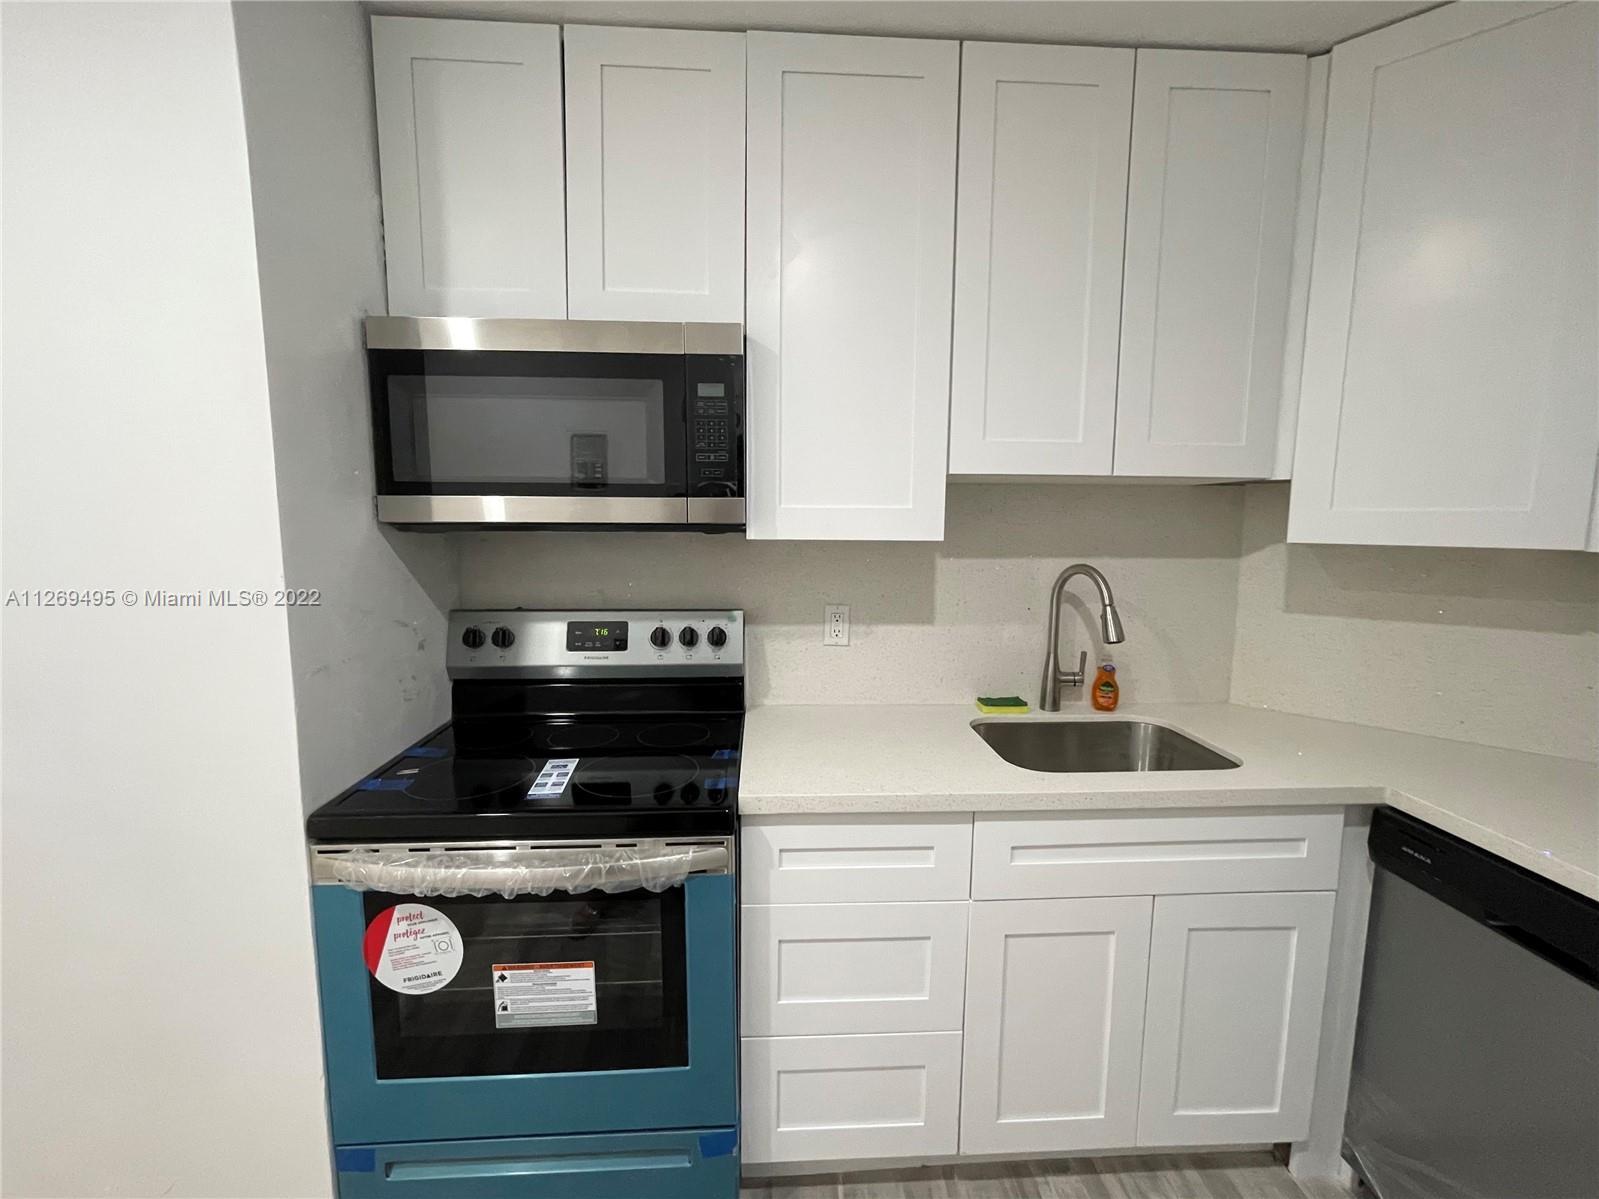 Newly Renovated 1/1 Bedroom Condo. Beautiful wood vinyl floors throughout unit, SS appliances, reces